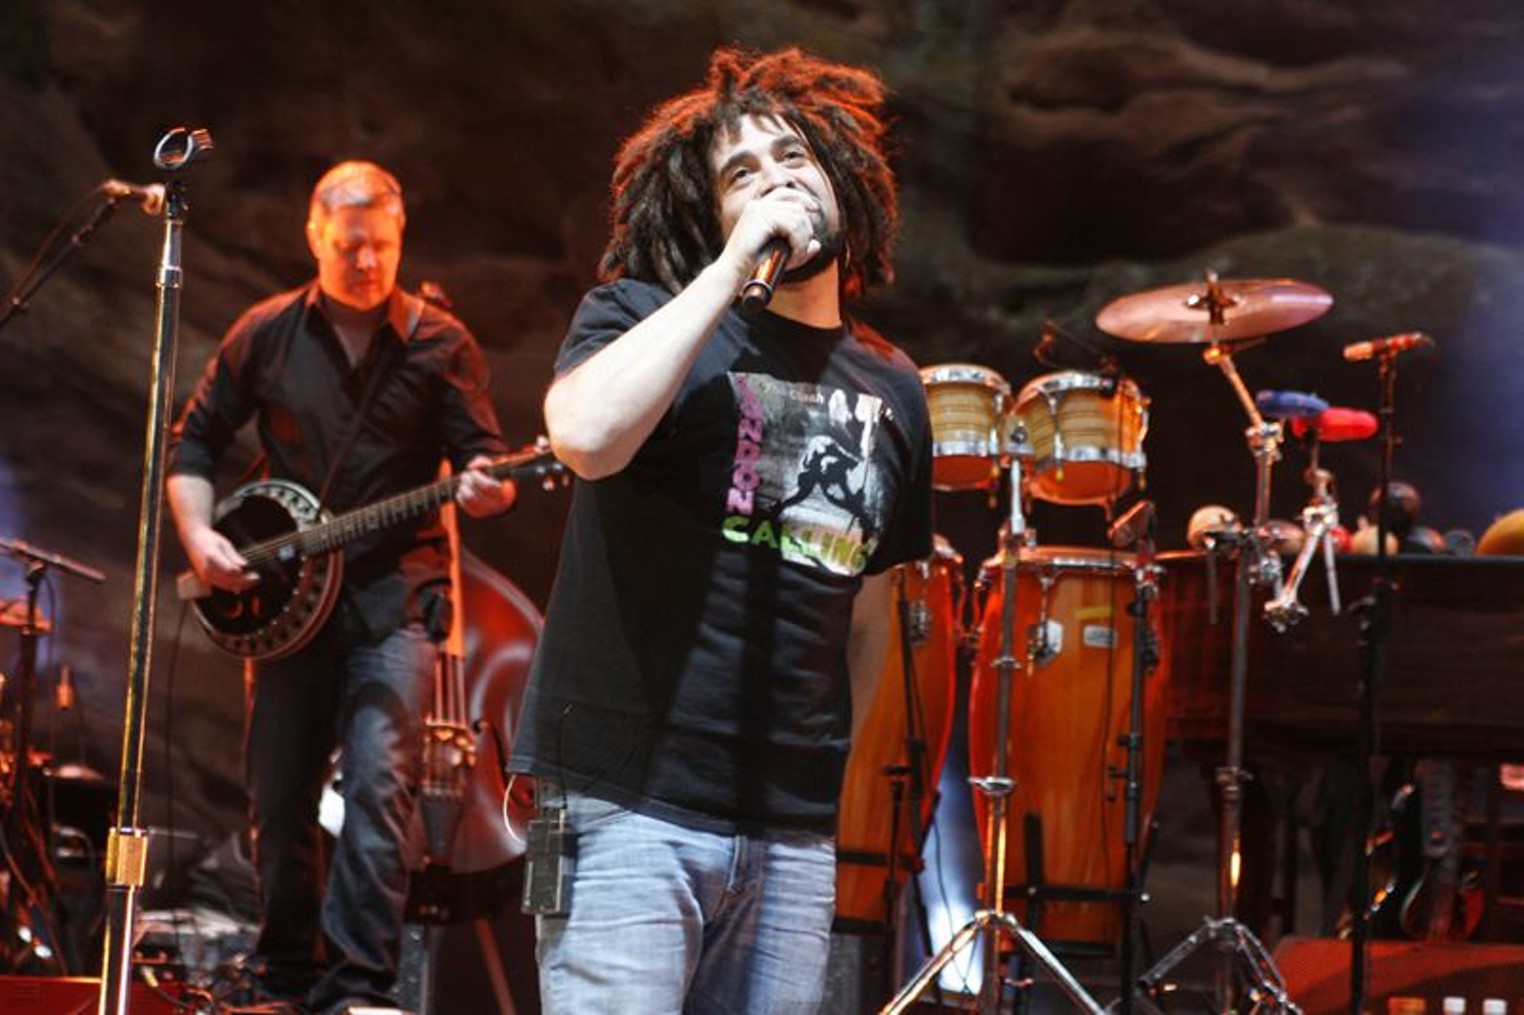 Counting Crows at Red Rocks Denver Denver Westword The Leading